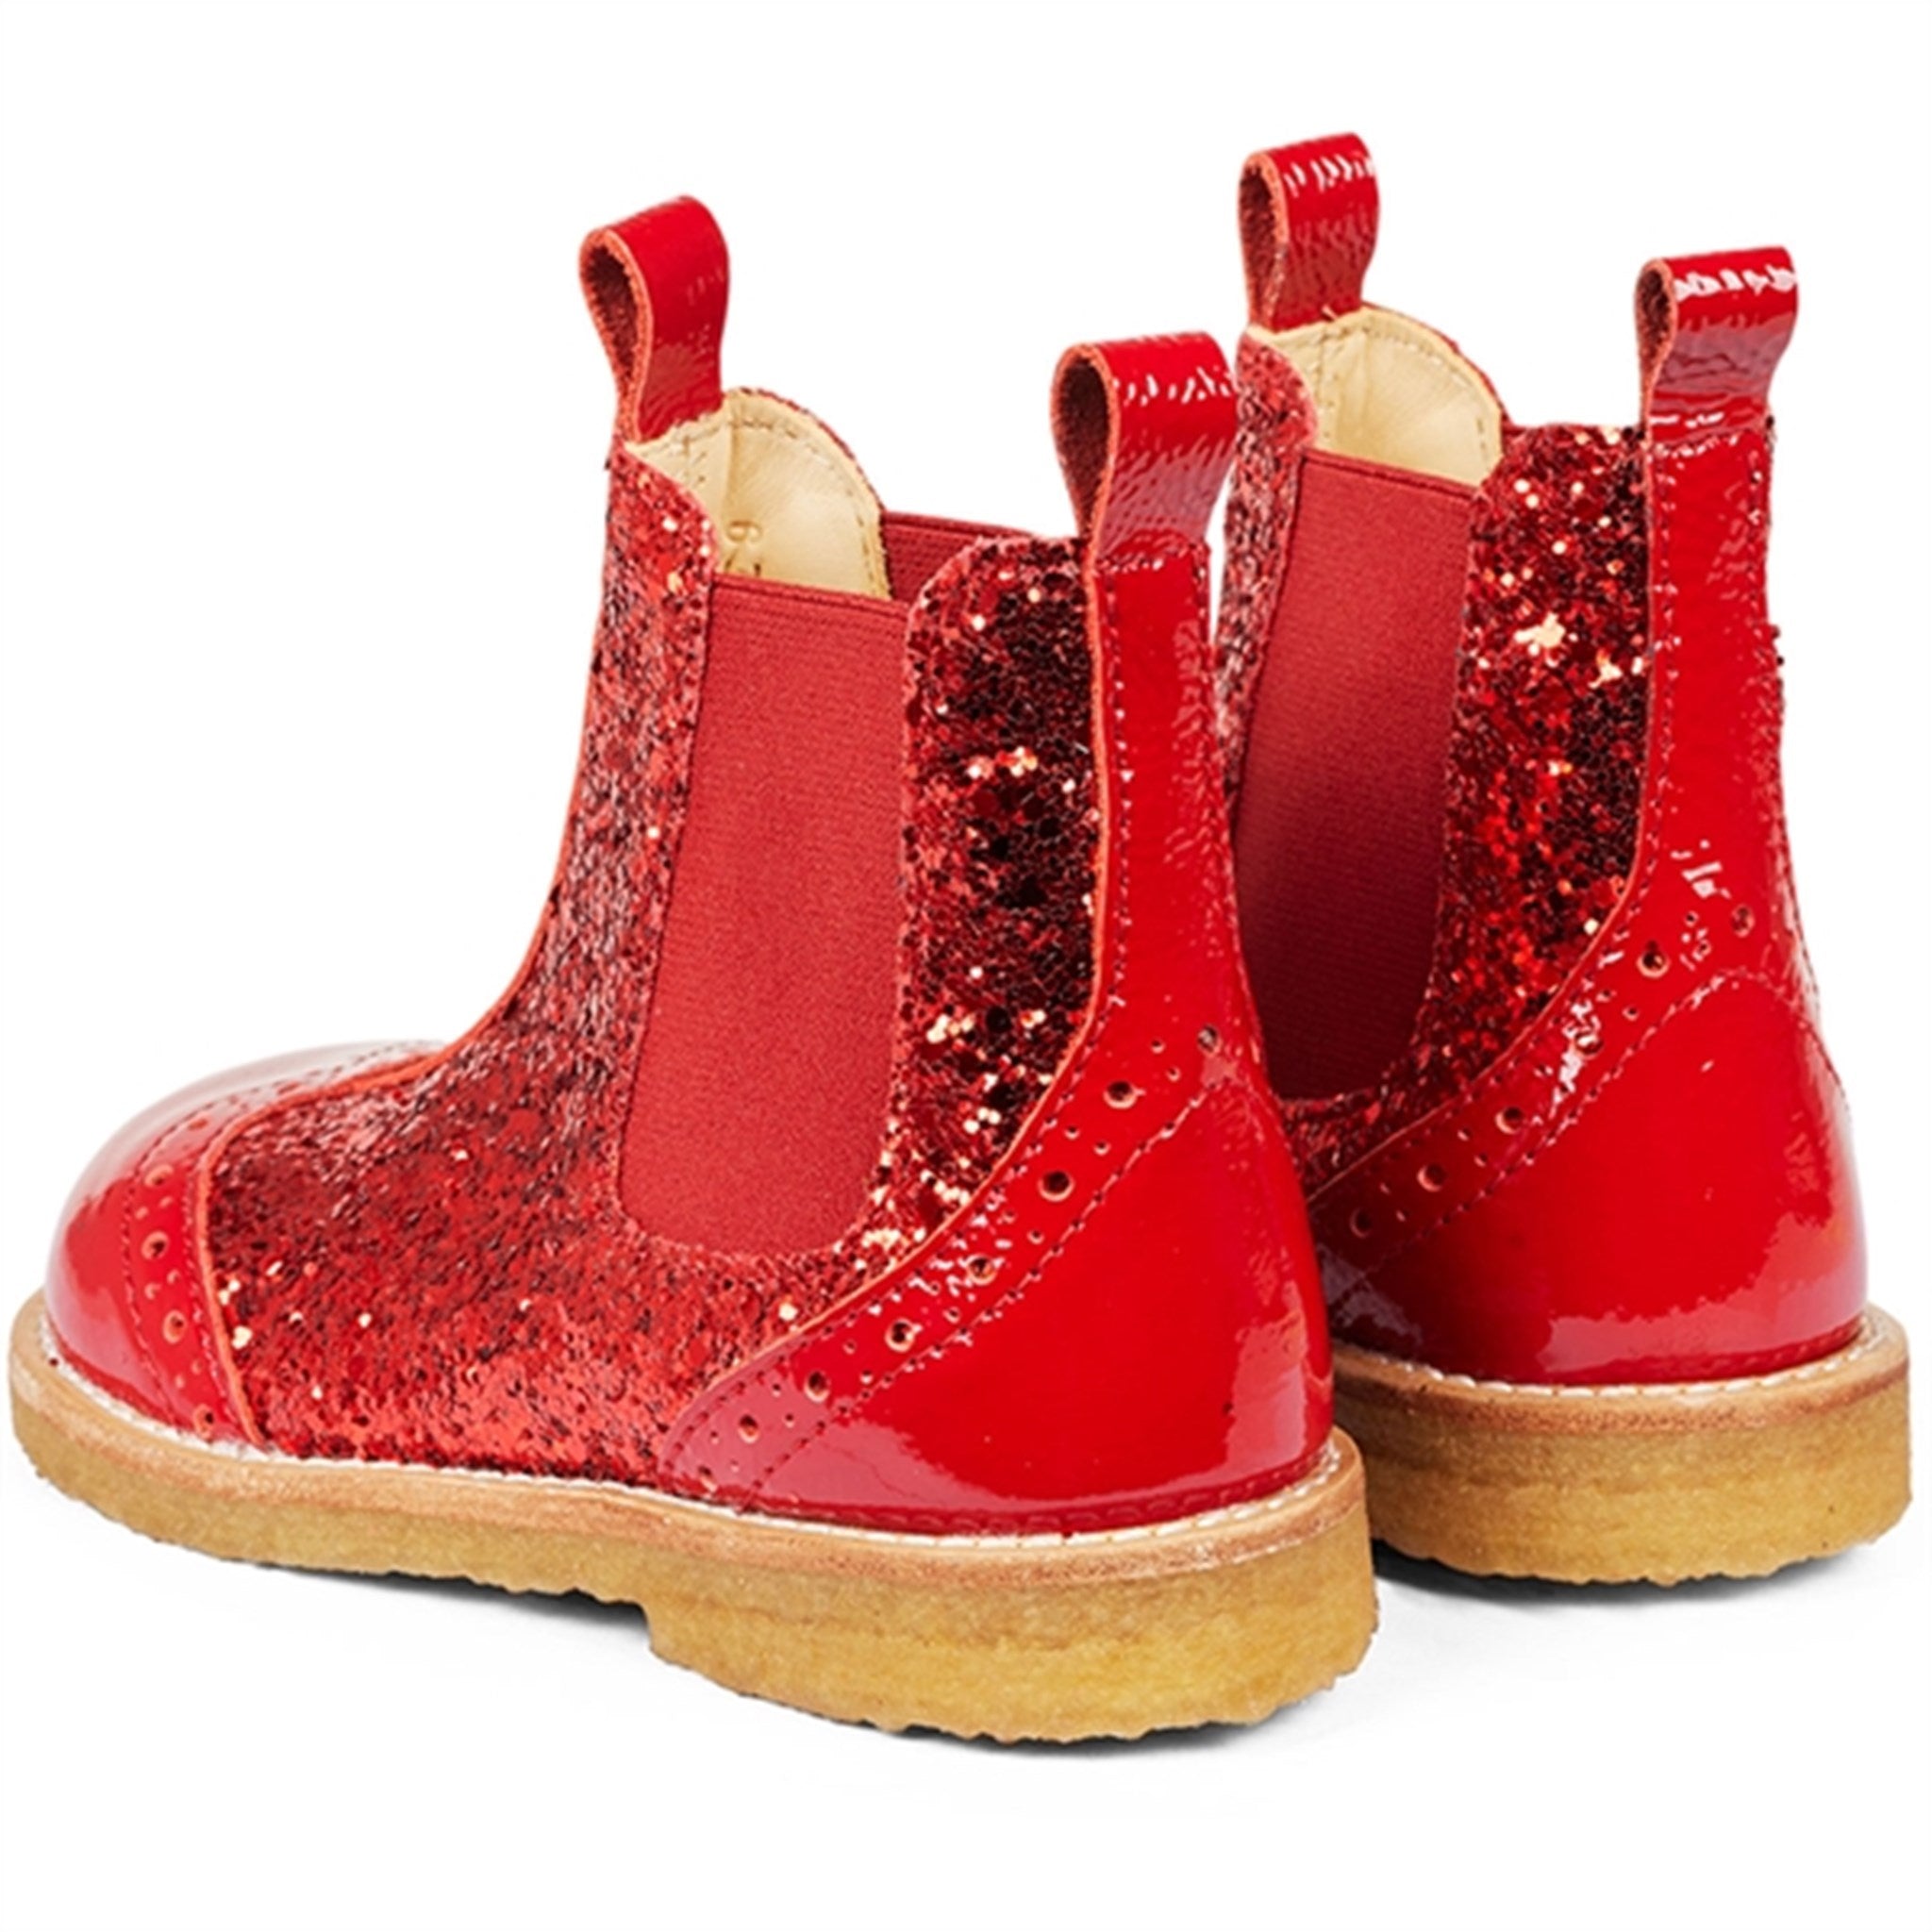 Angulus Chelsea Boots With Glitter Red/Red/Red Elastic 3